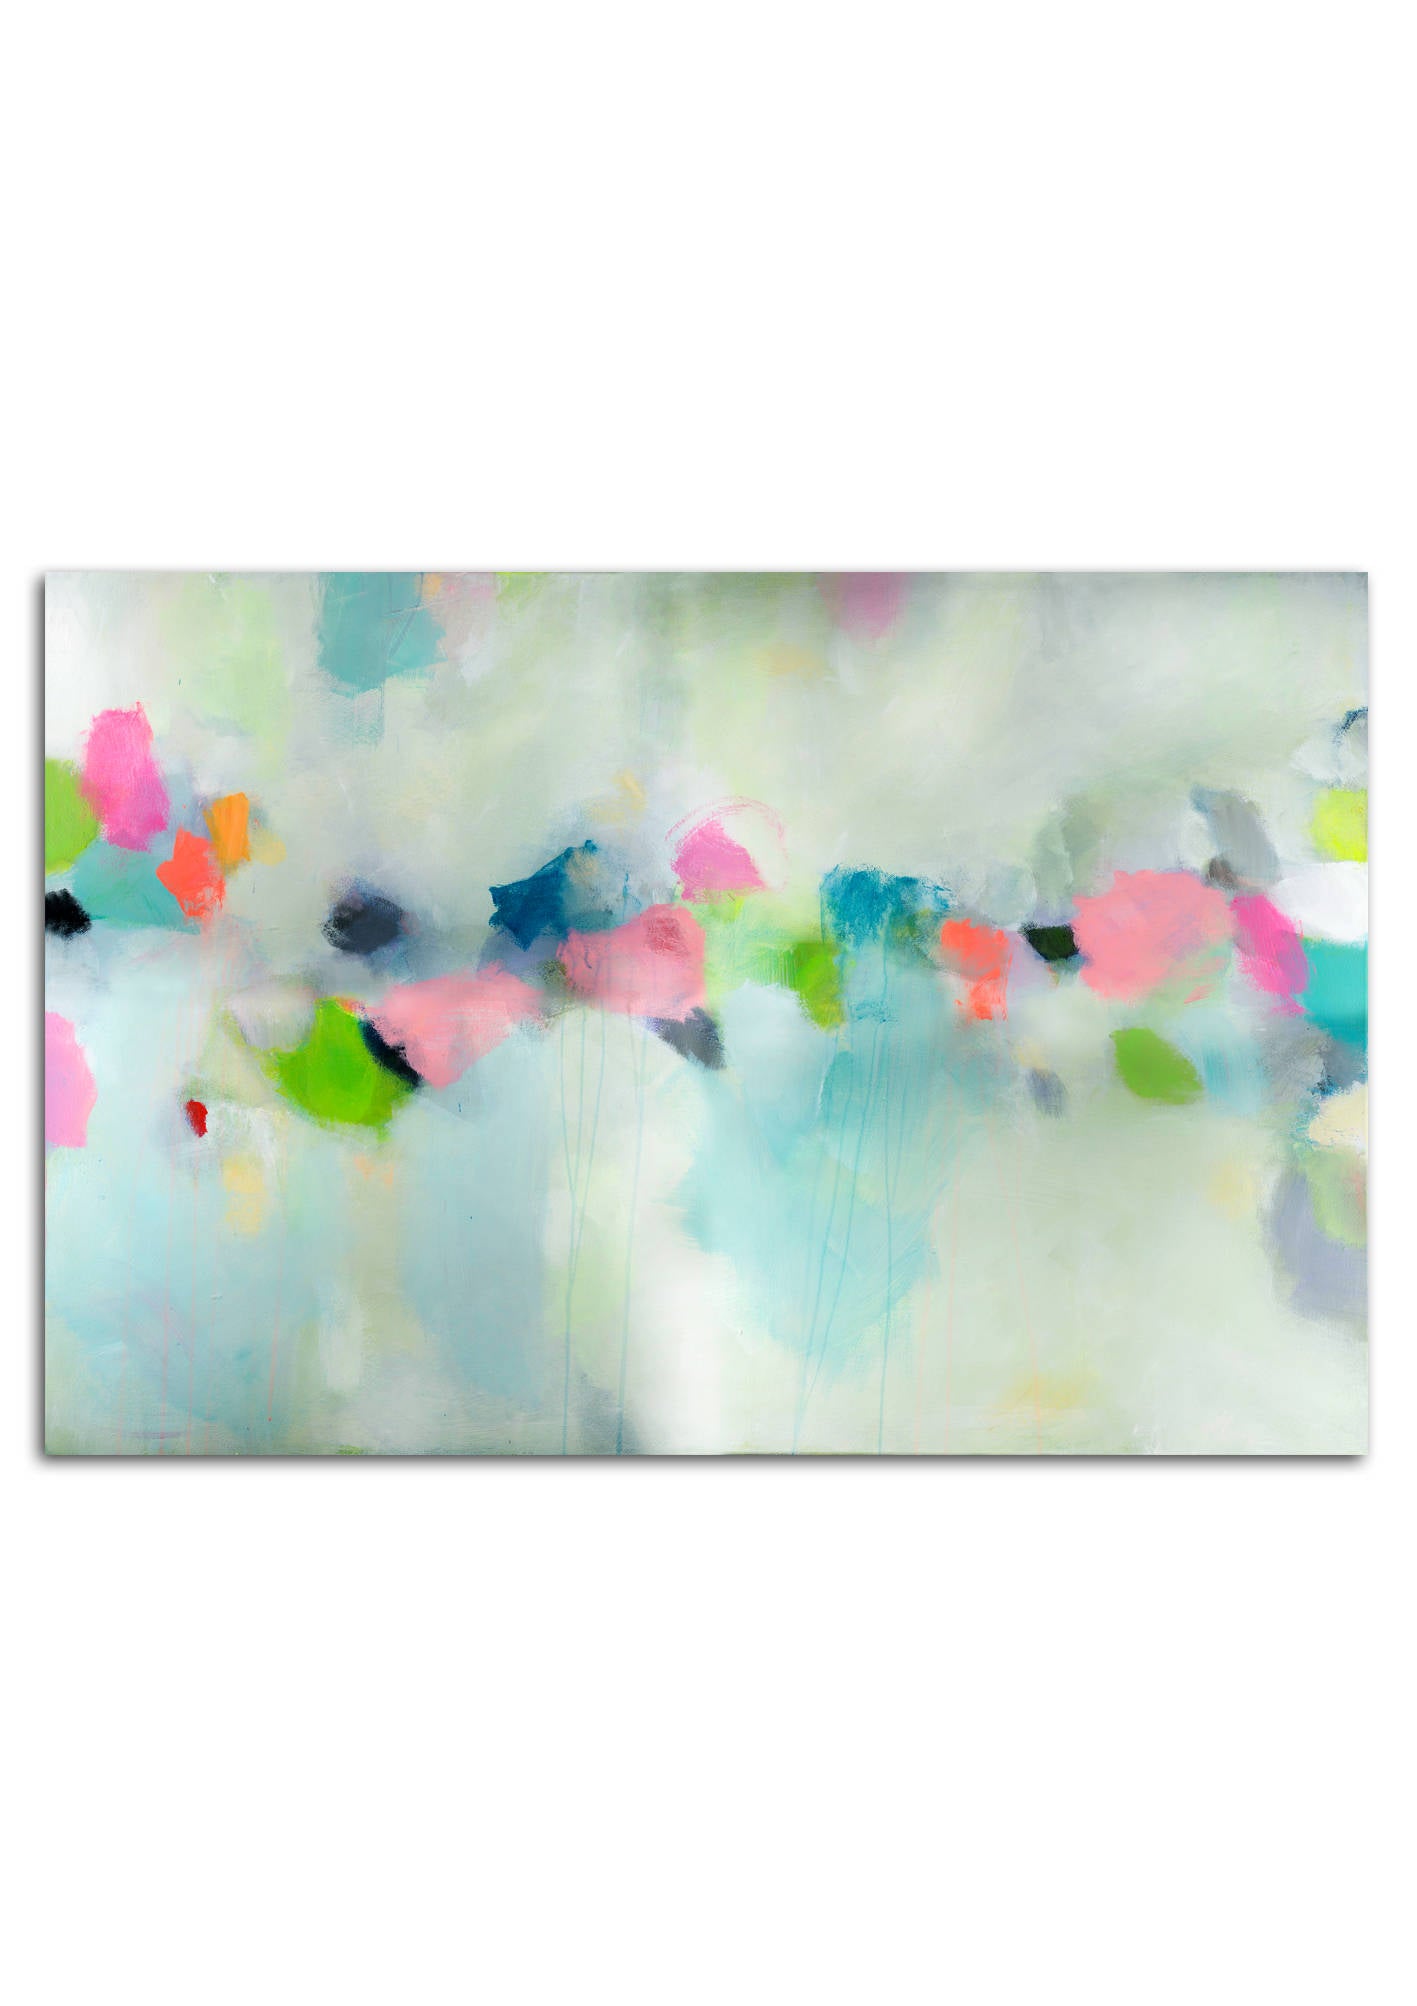 Large Abstract Print from canvas painting giclee Blue painting with green - modern Painting wall art prints by Camilo Mattis - camilomattis.com